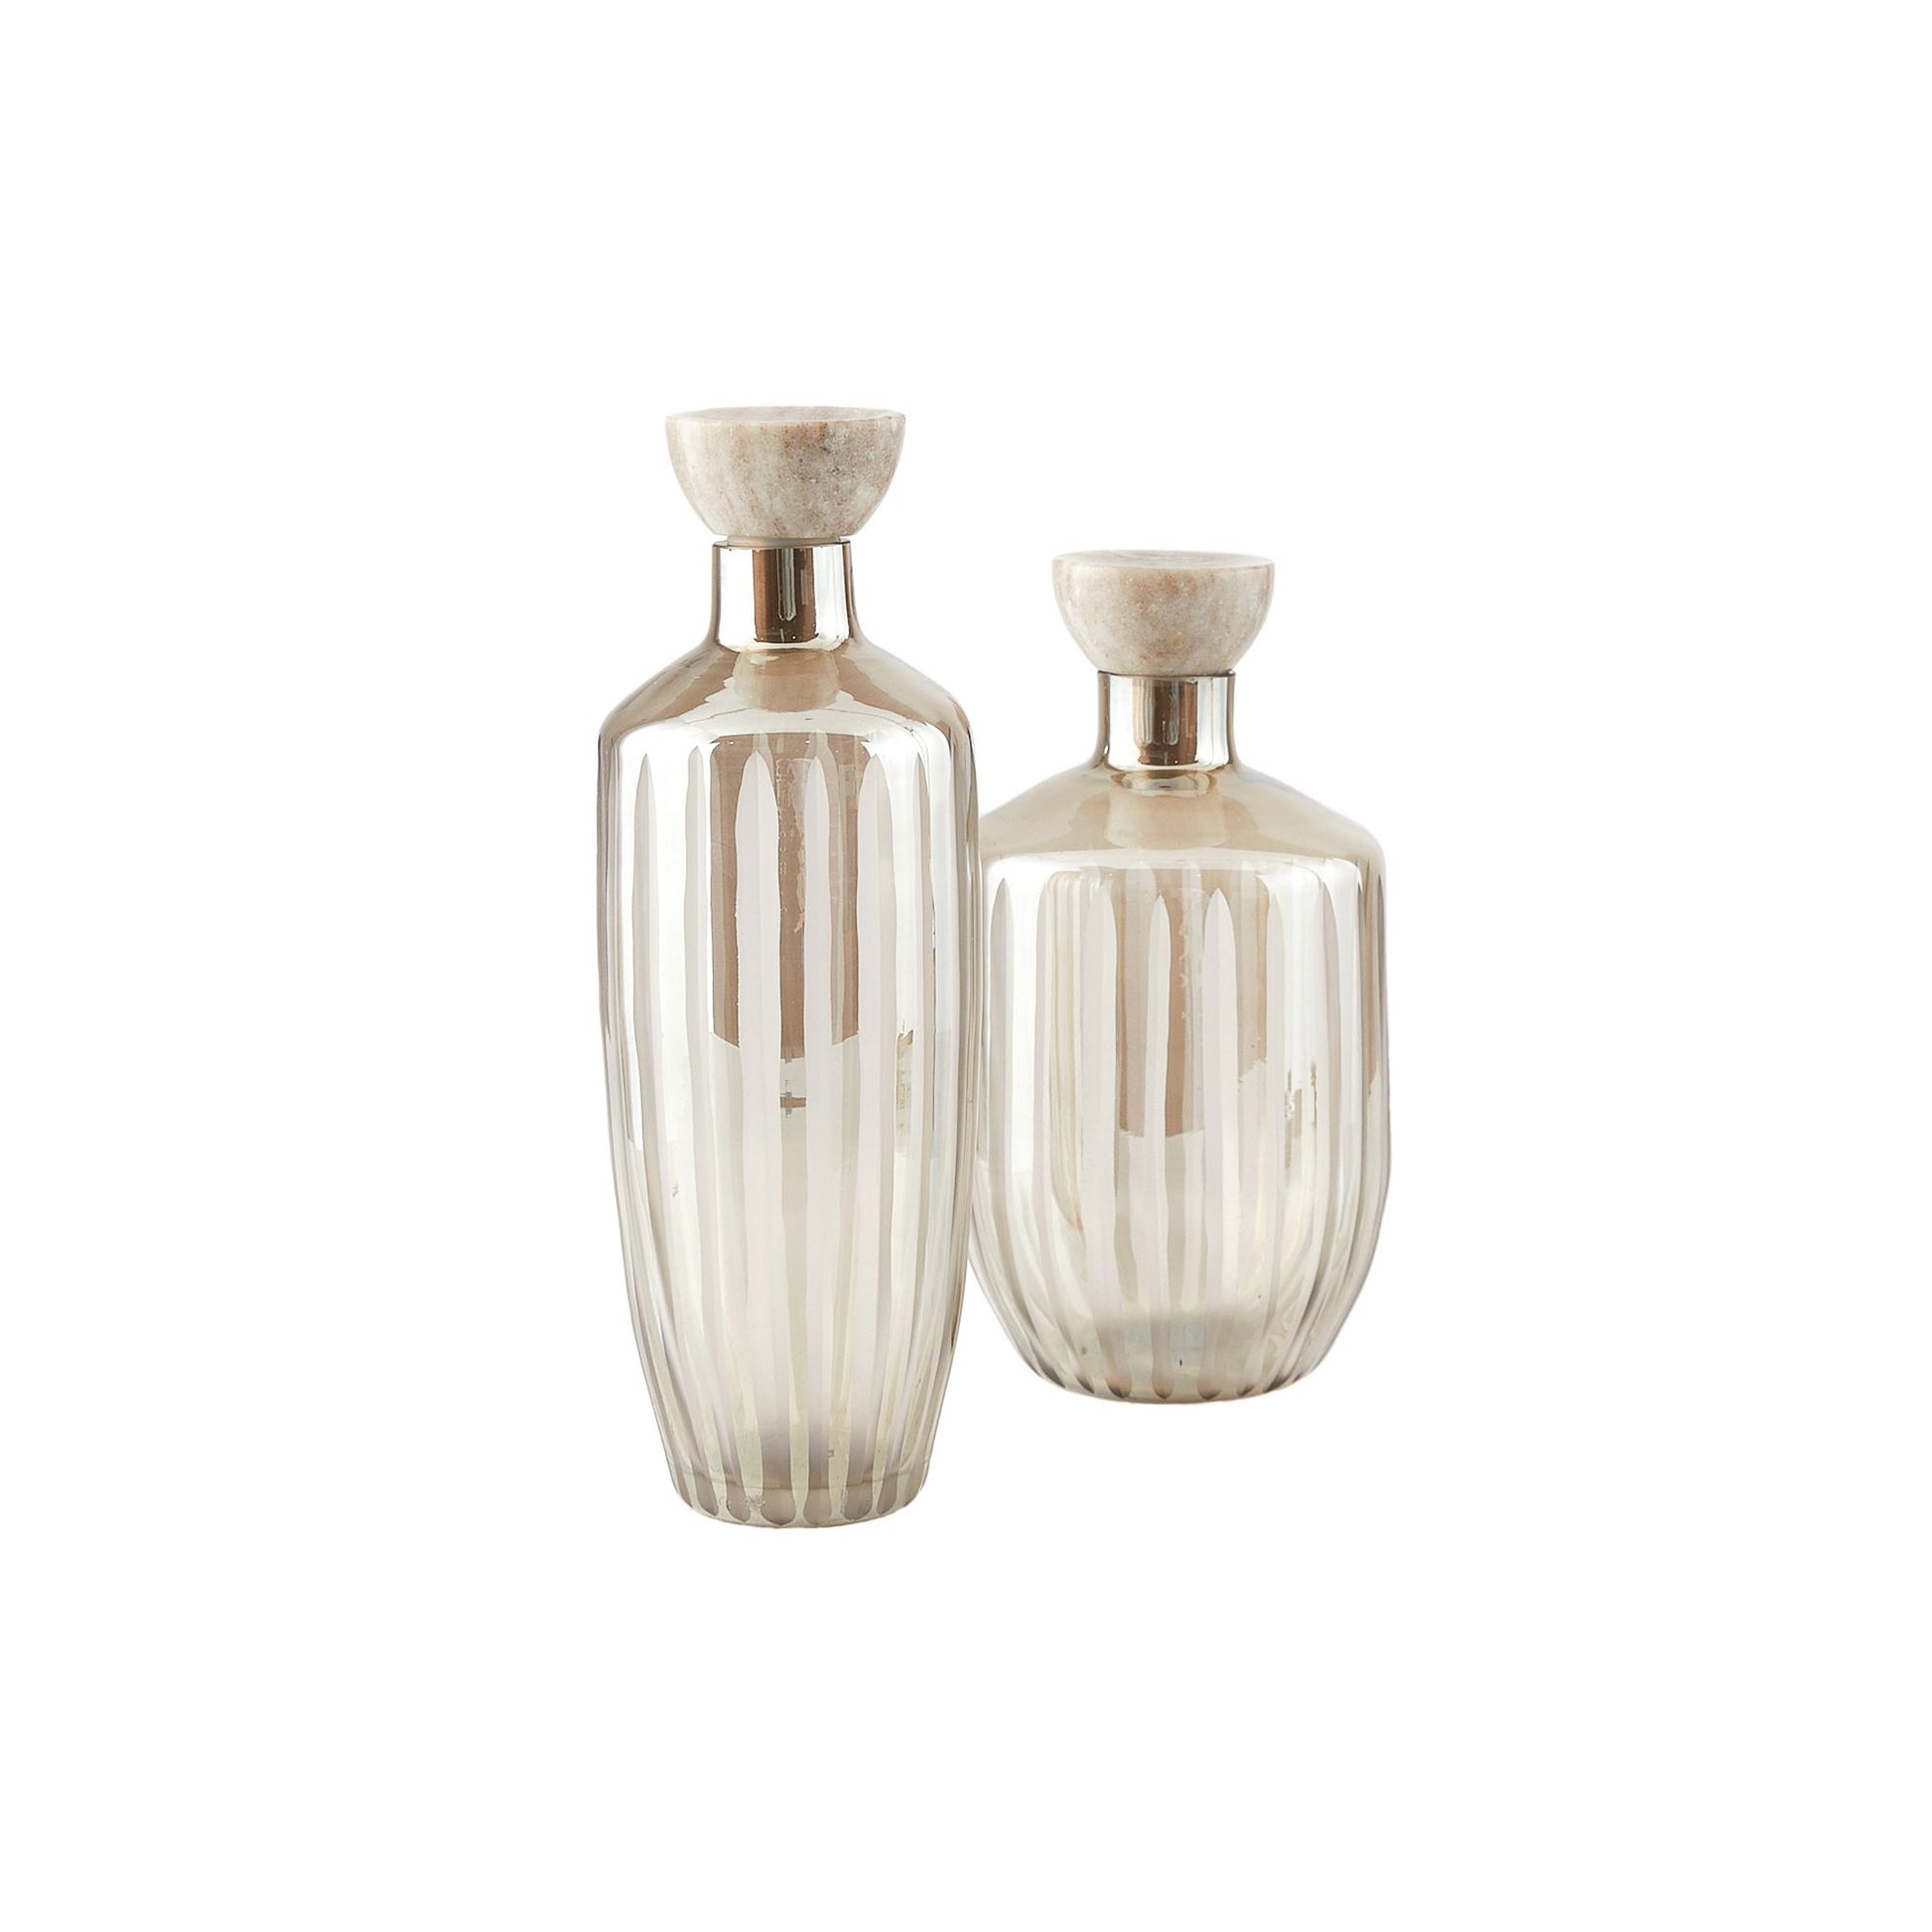 arteriors arielle decanters angle